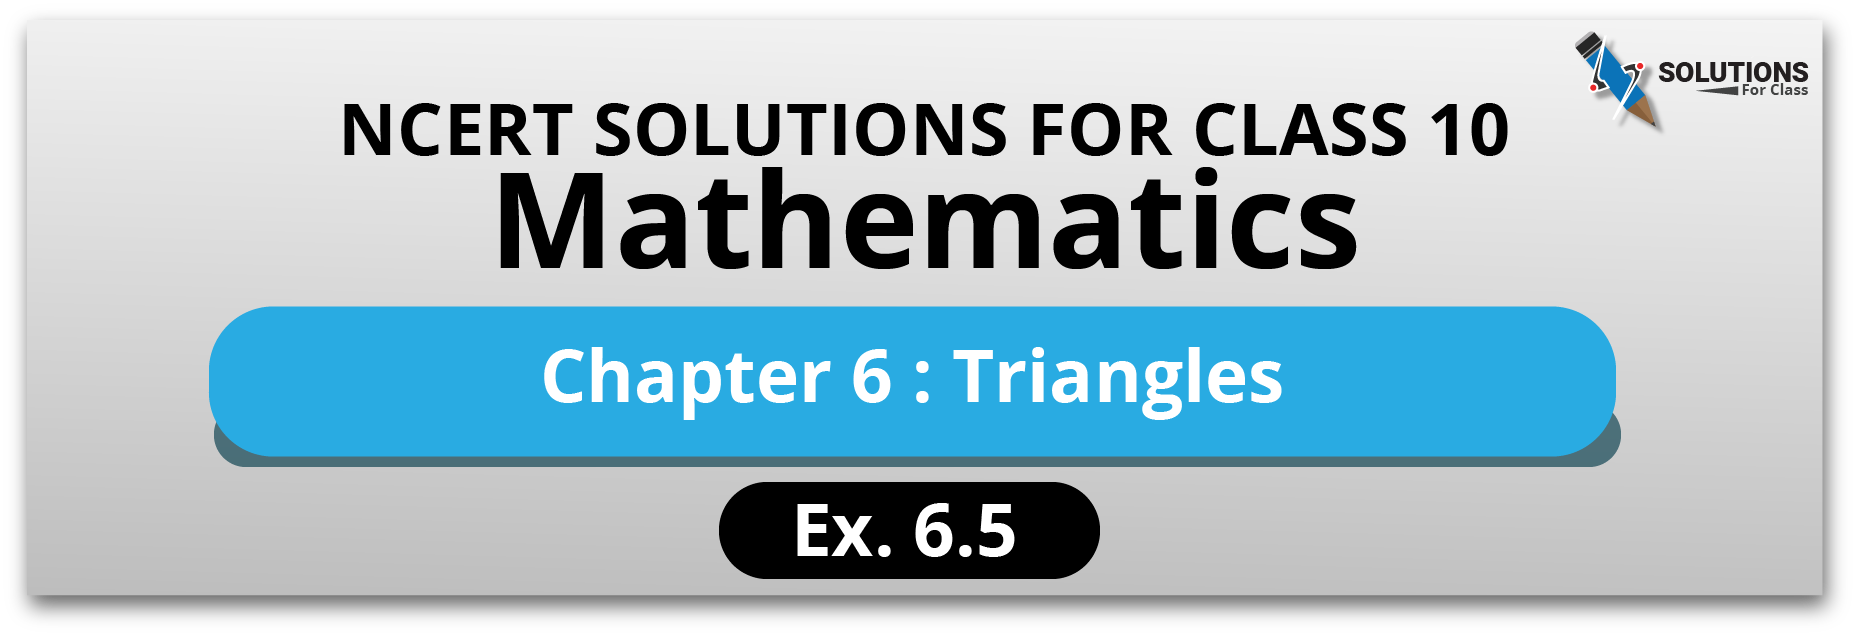 NCERT Solution For Class 10, Maths, Chapter 6 Triangles, Exercise 6.5